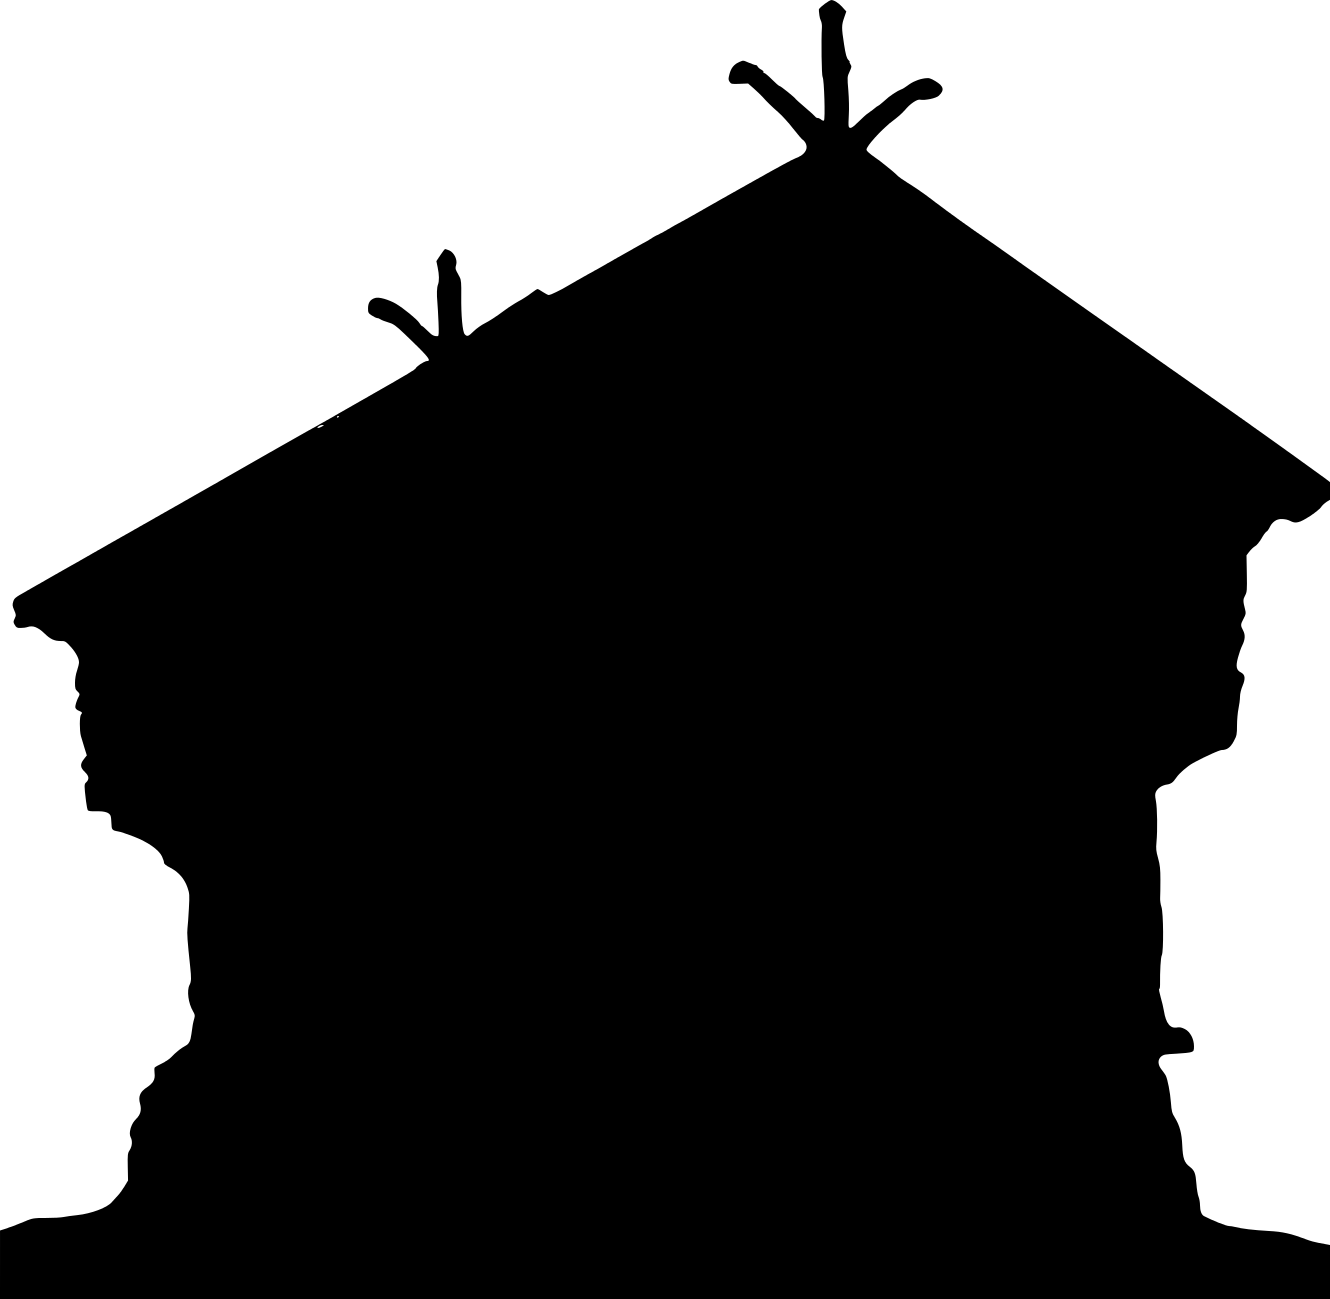 House Silhouette   Clipart Best